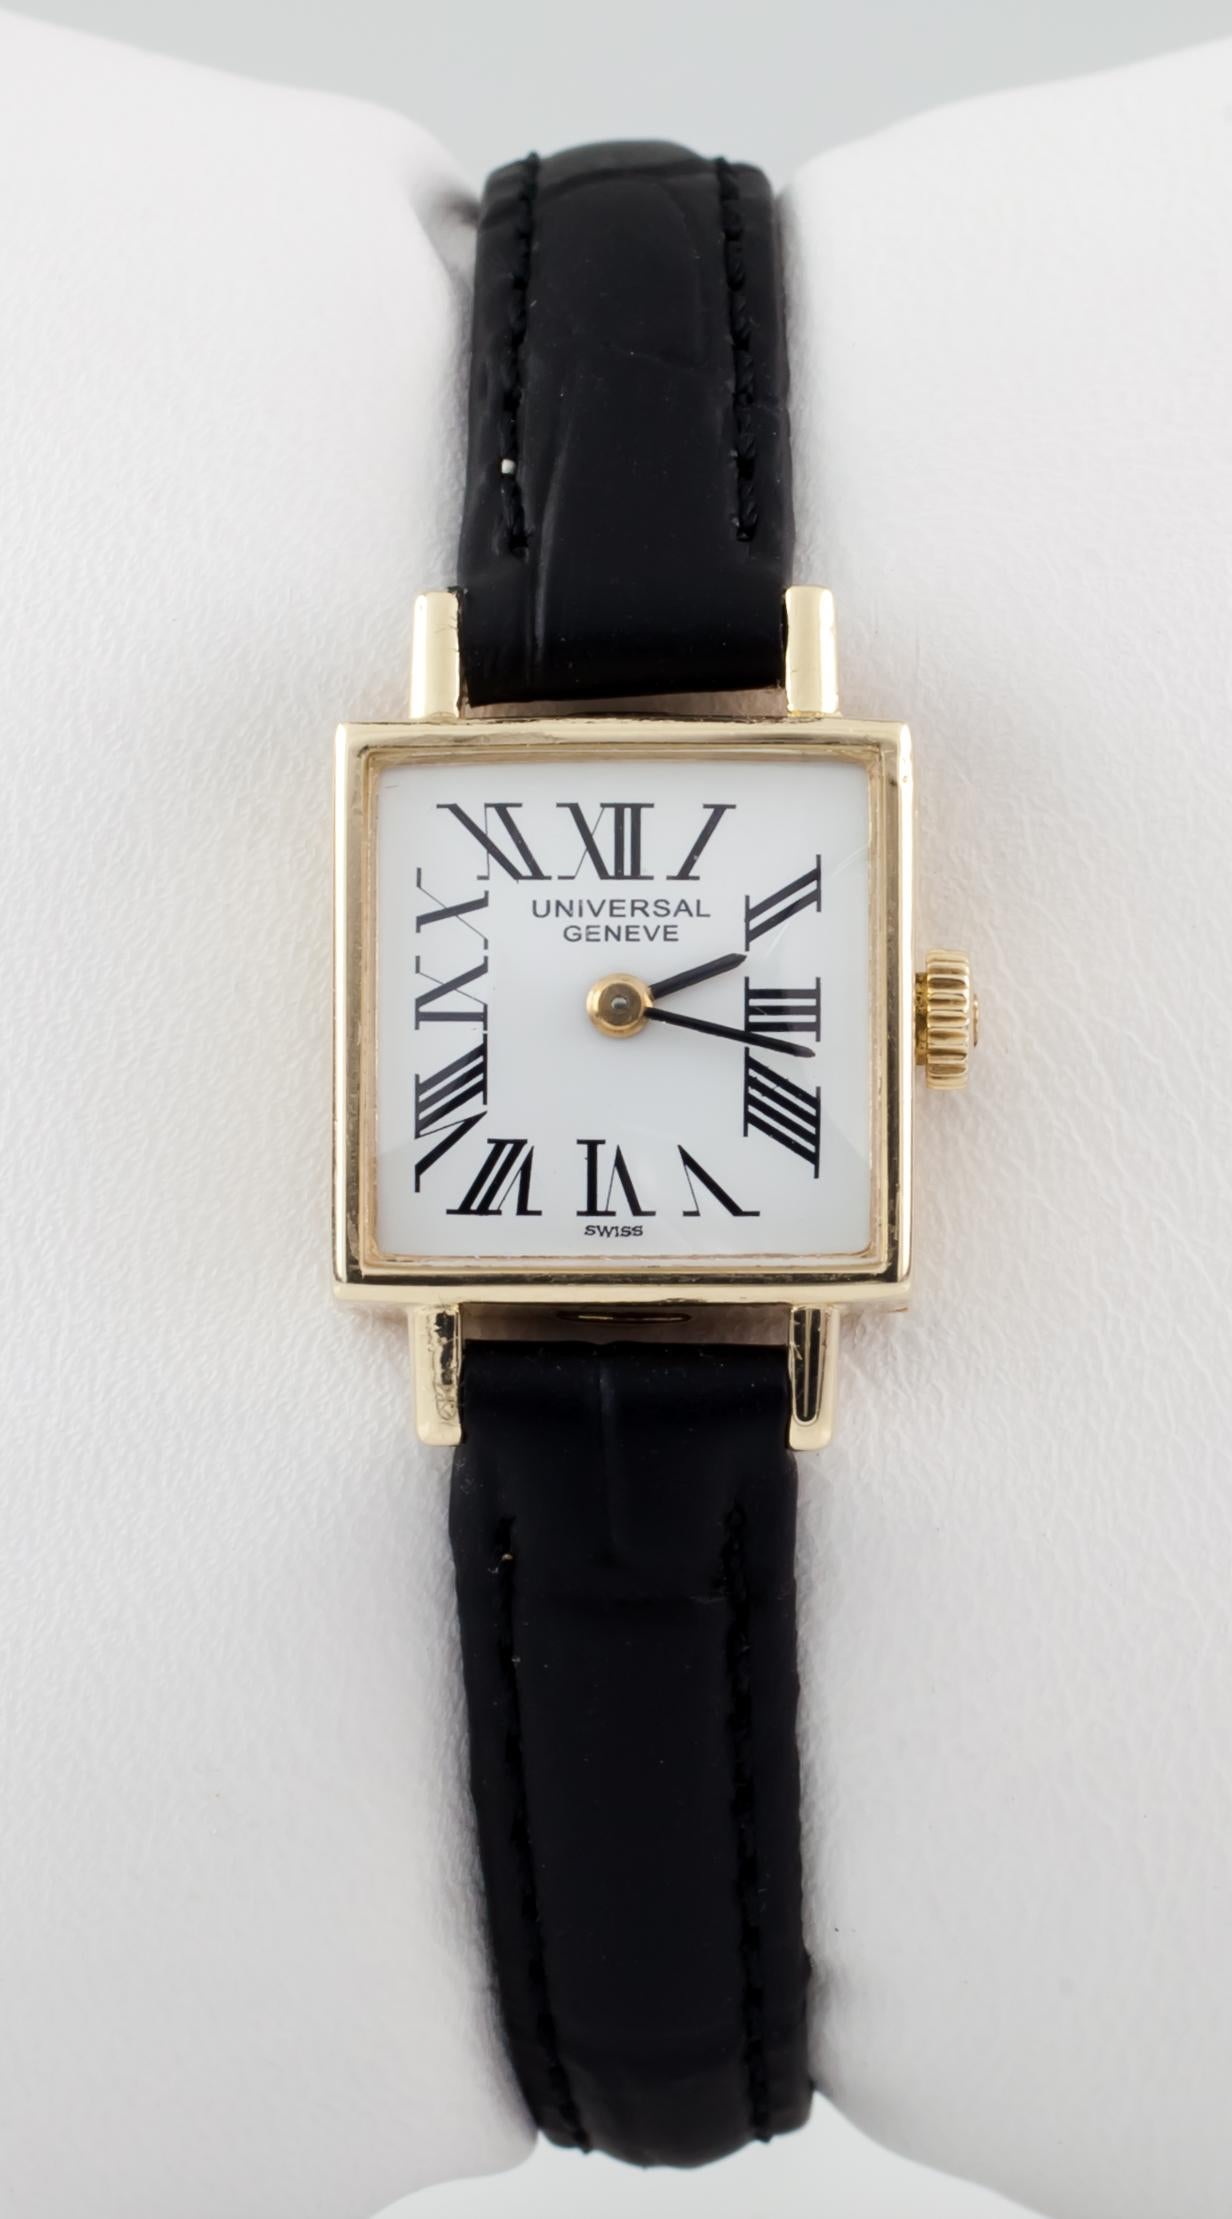 14k Yellow Gold Universal Geneve Women's Square Hand-Winding Watch

Movement #04
Case #4266-17134

14k Yellow Gold Square Case
17 mm Wide (18 mm w/ Crown)
16 mm Long
Lug-to-Lug Distance = 24 mm
Lug-to-Lug Width = 9 mm
Thickness = 7 mm

White Dial w/